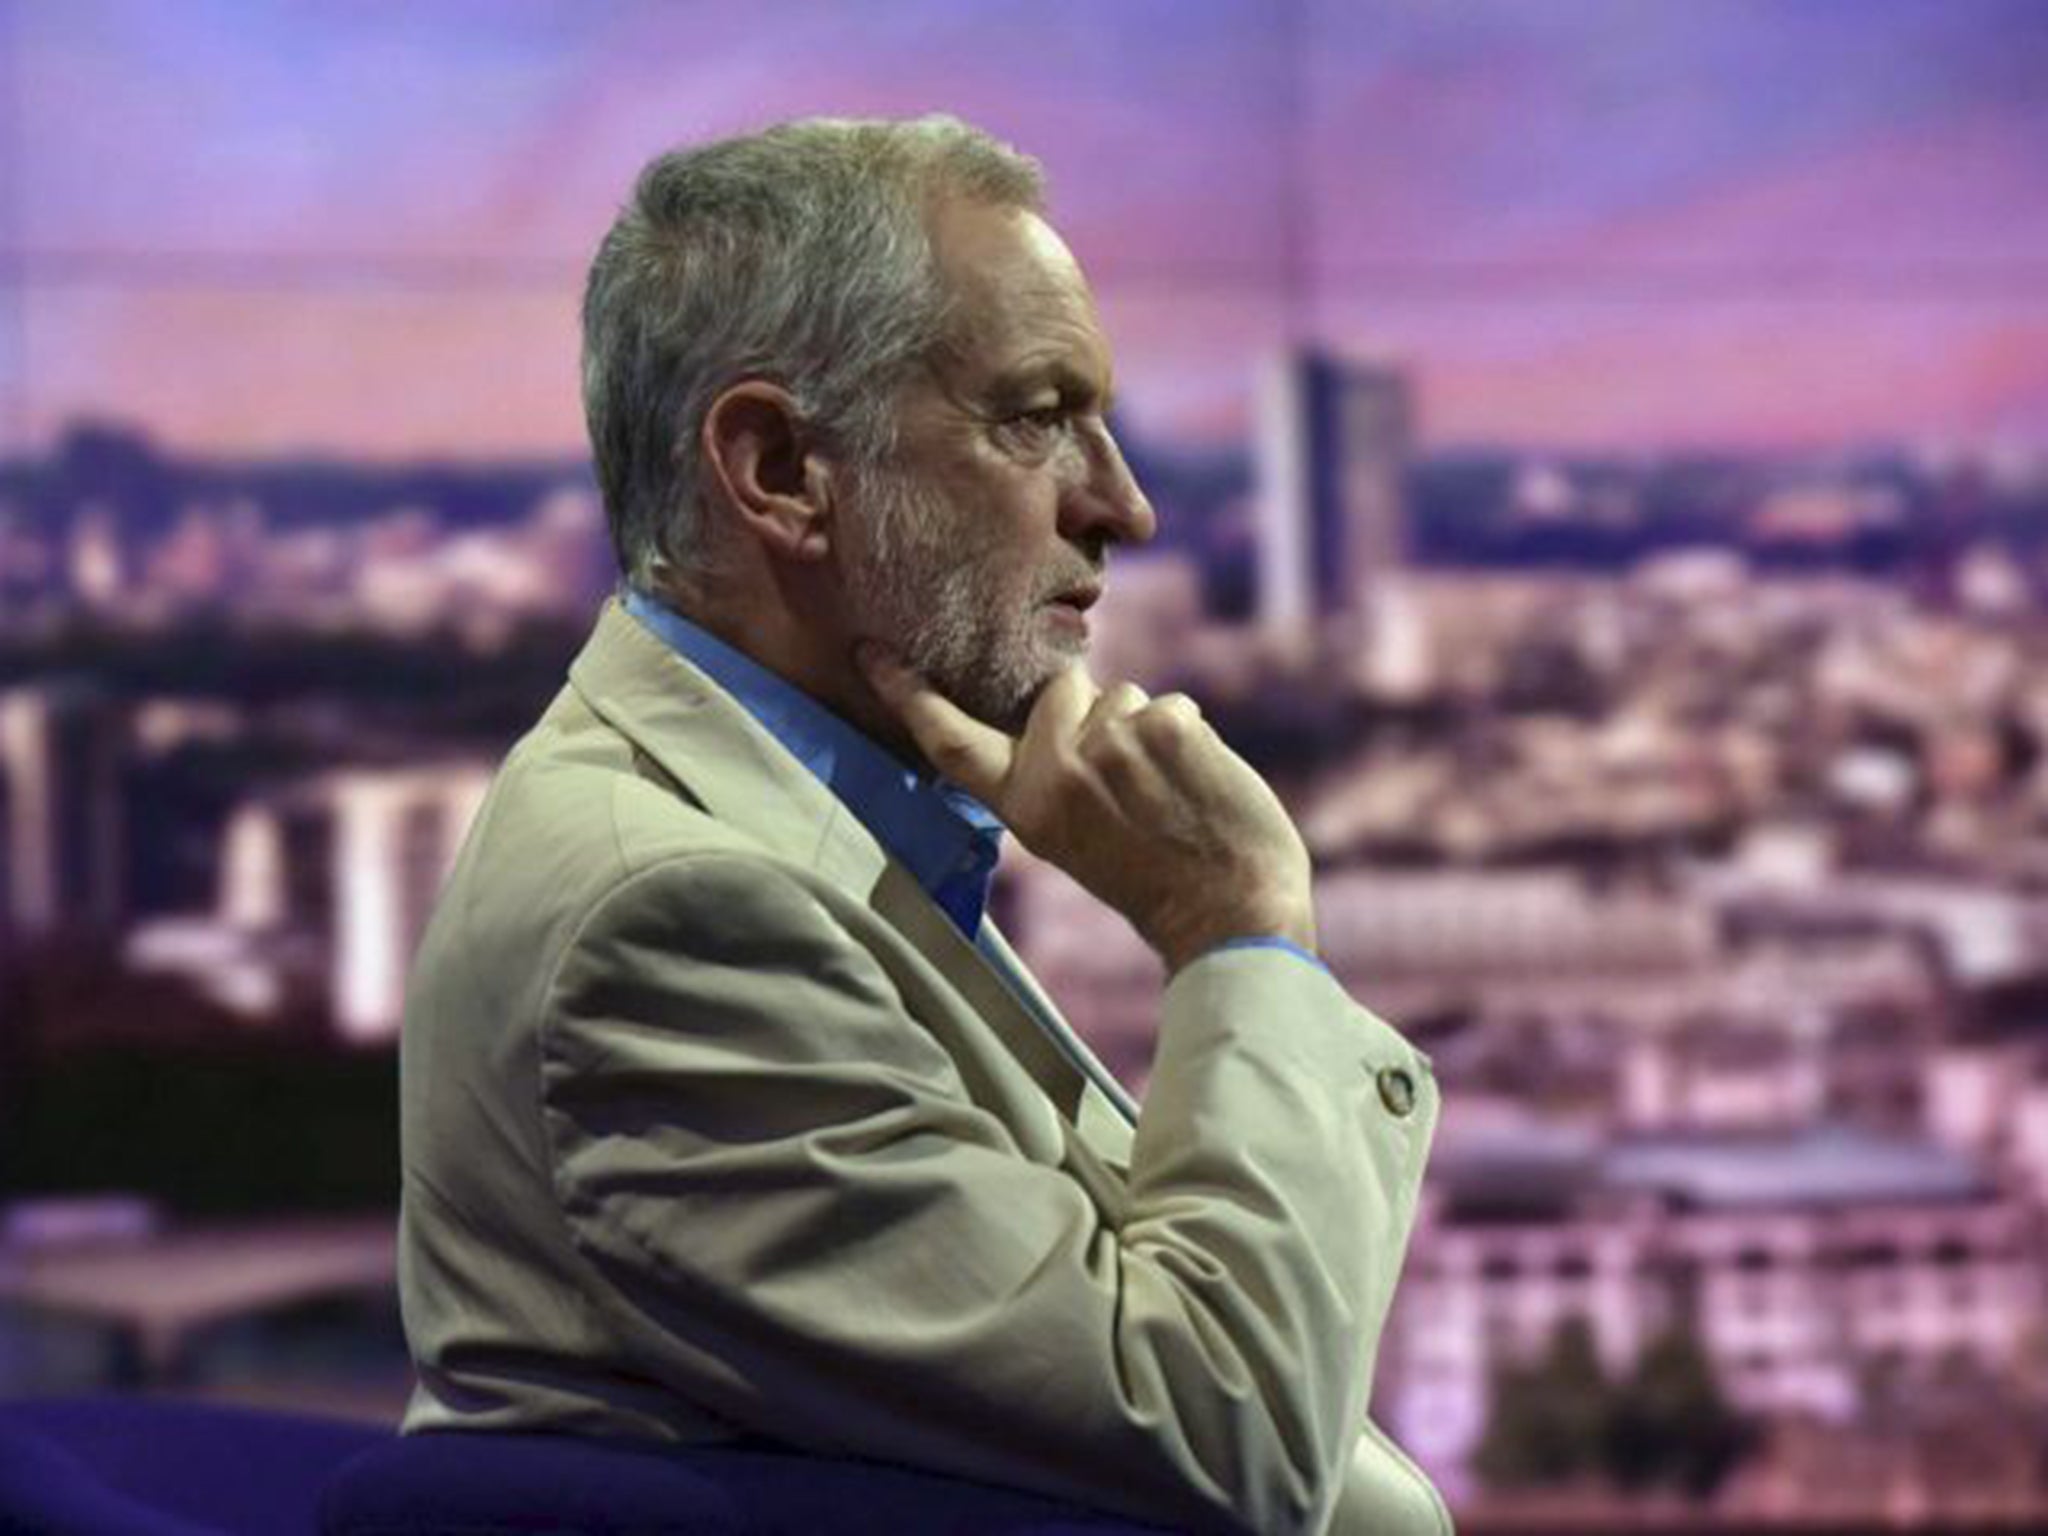 Jeremy Corbyn has stated that he is against a planned third runway at Heathrow airport